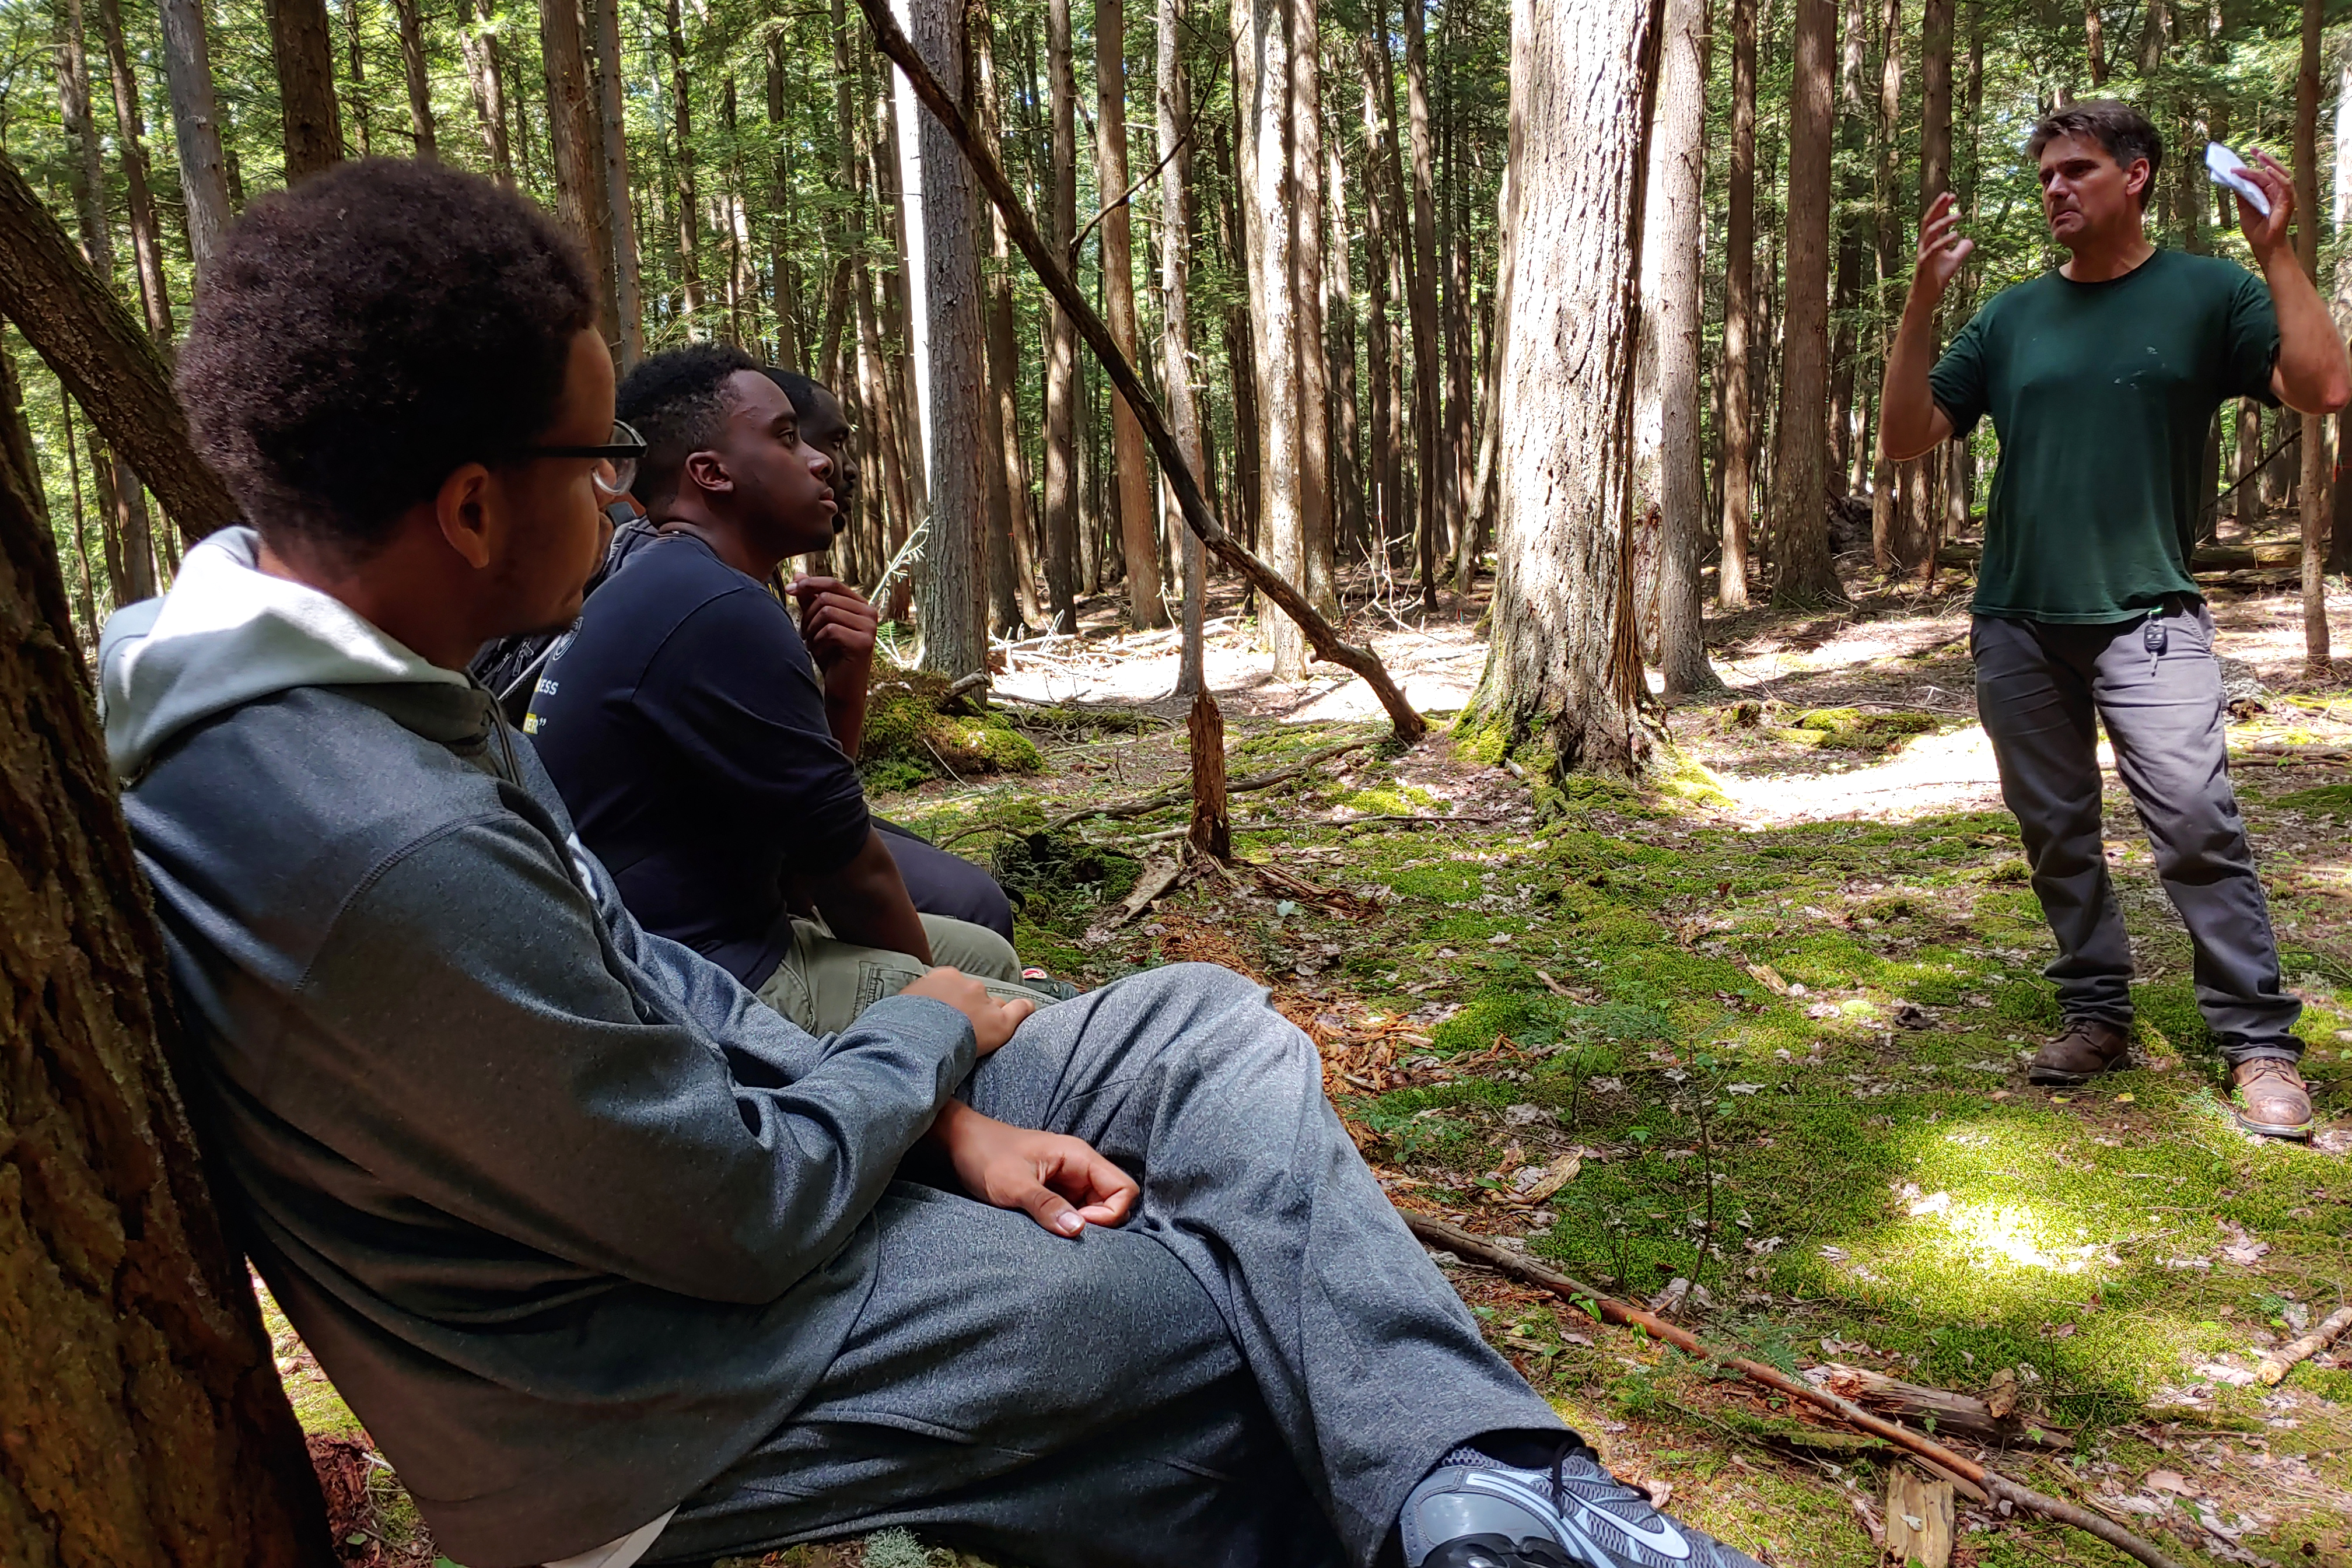 Students receiving field instruction in a forest